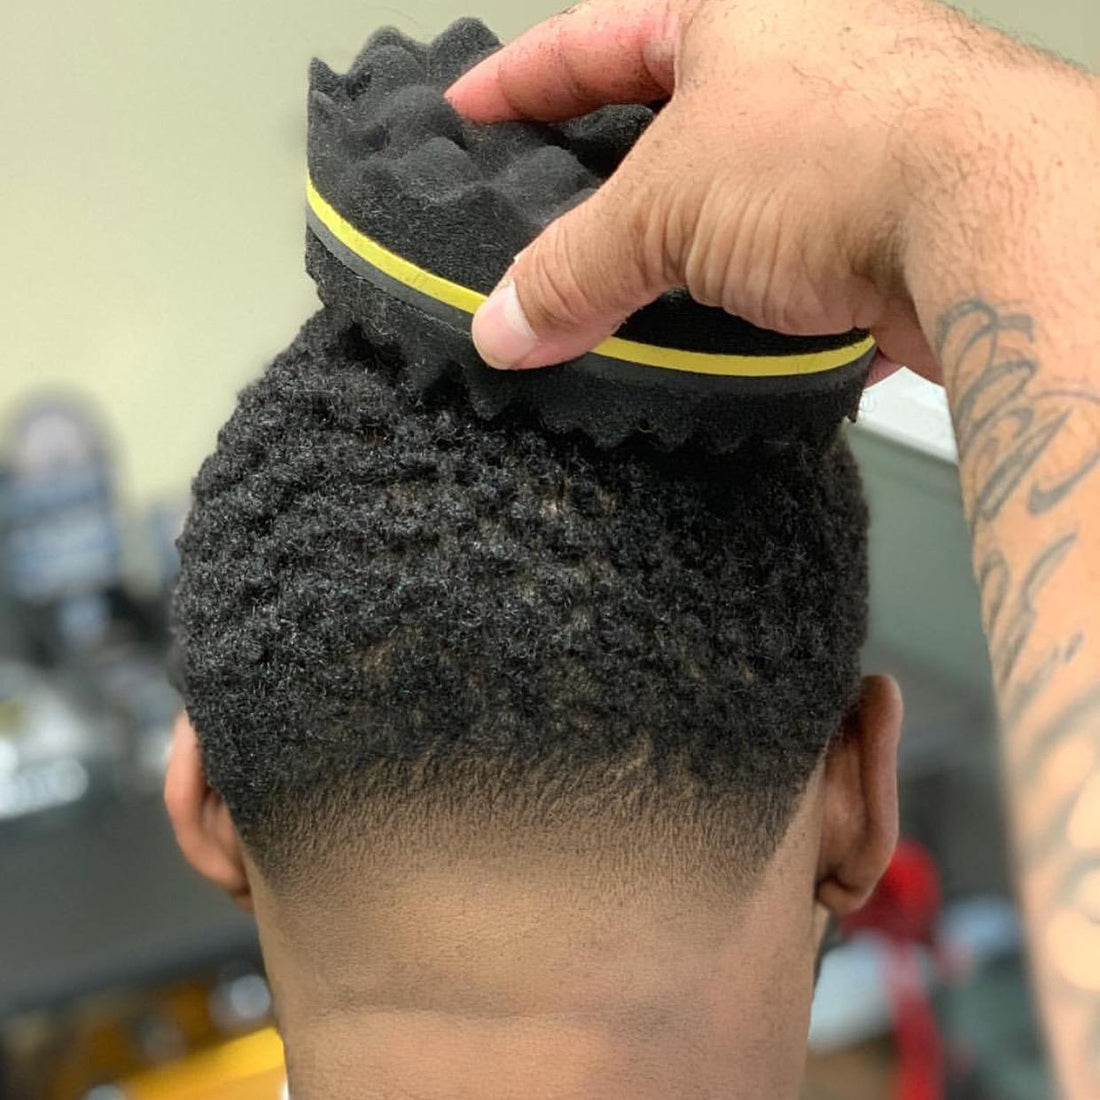 Money-Making Ideas for Barbers and Barbershops